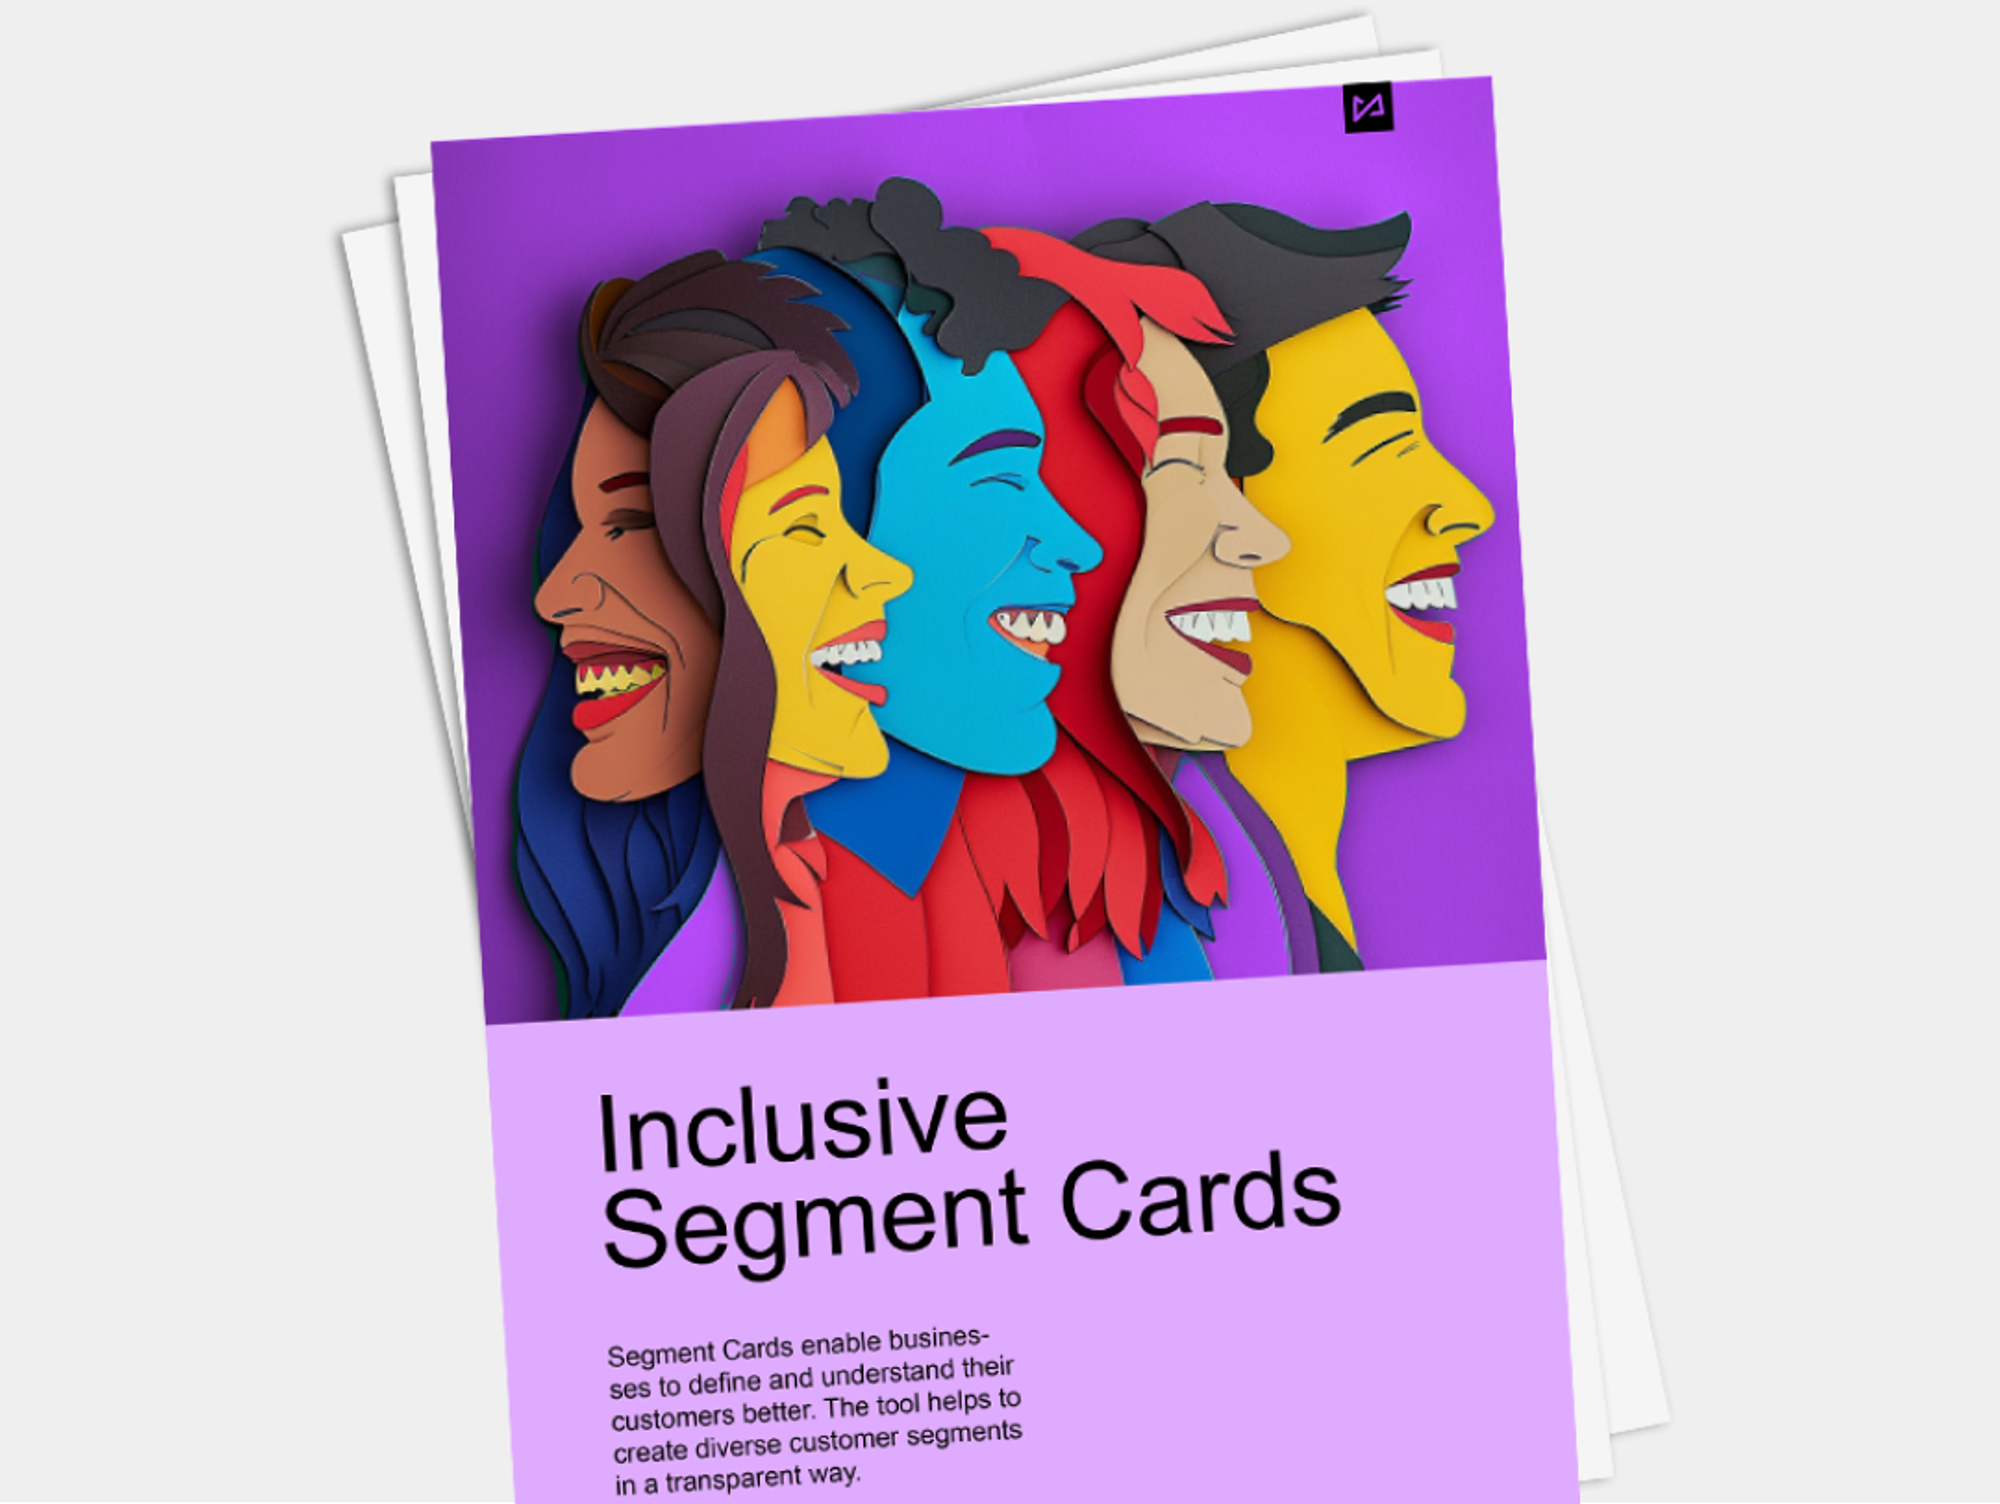 Booklet with "Inclusive Segment Cards" on its cover